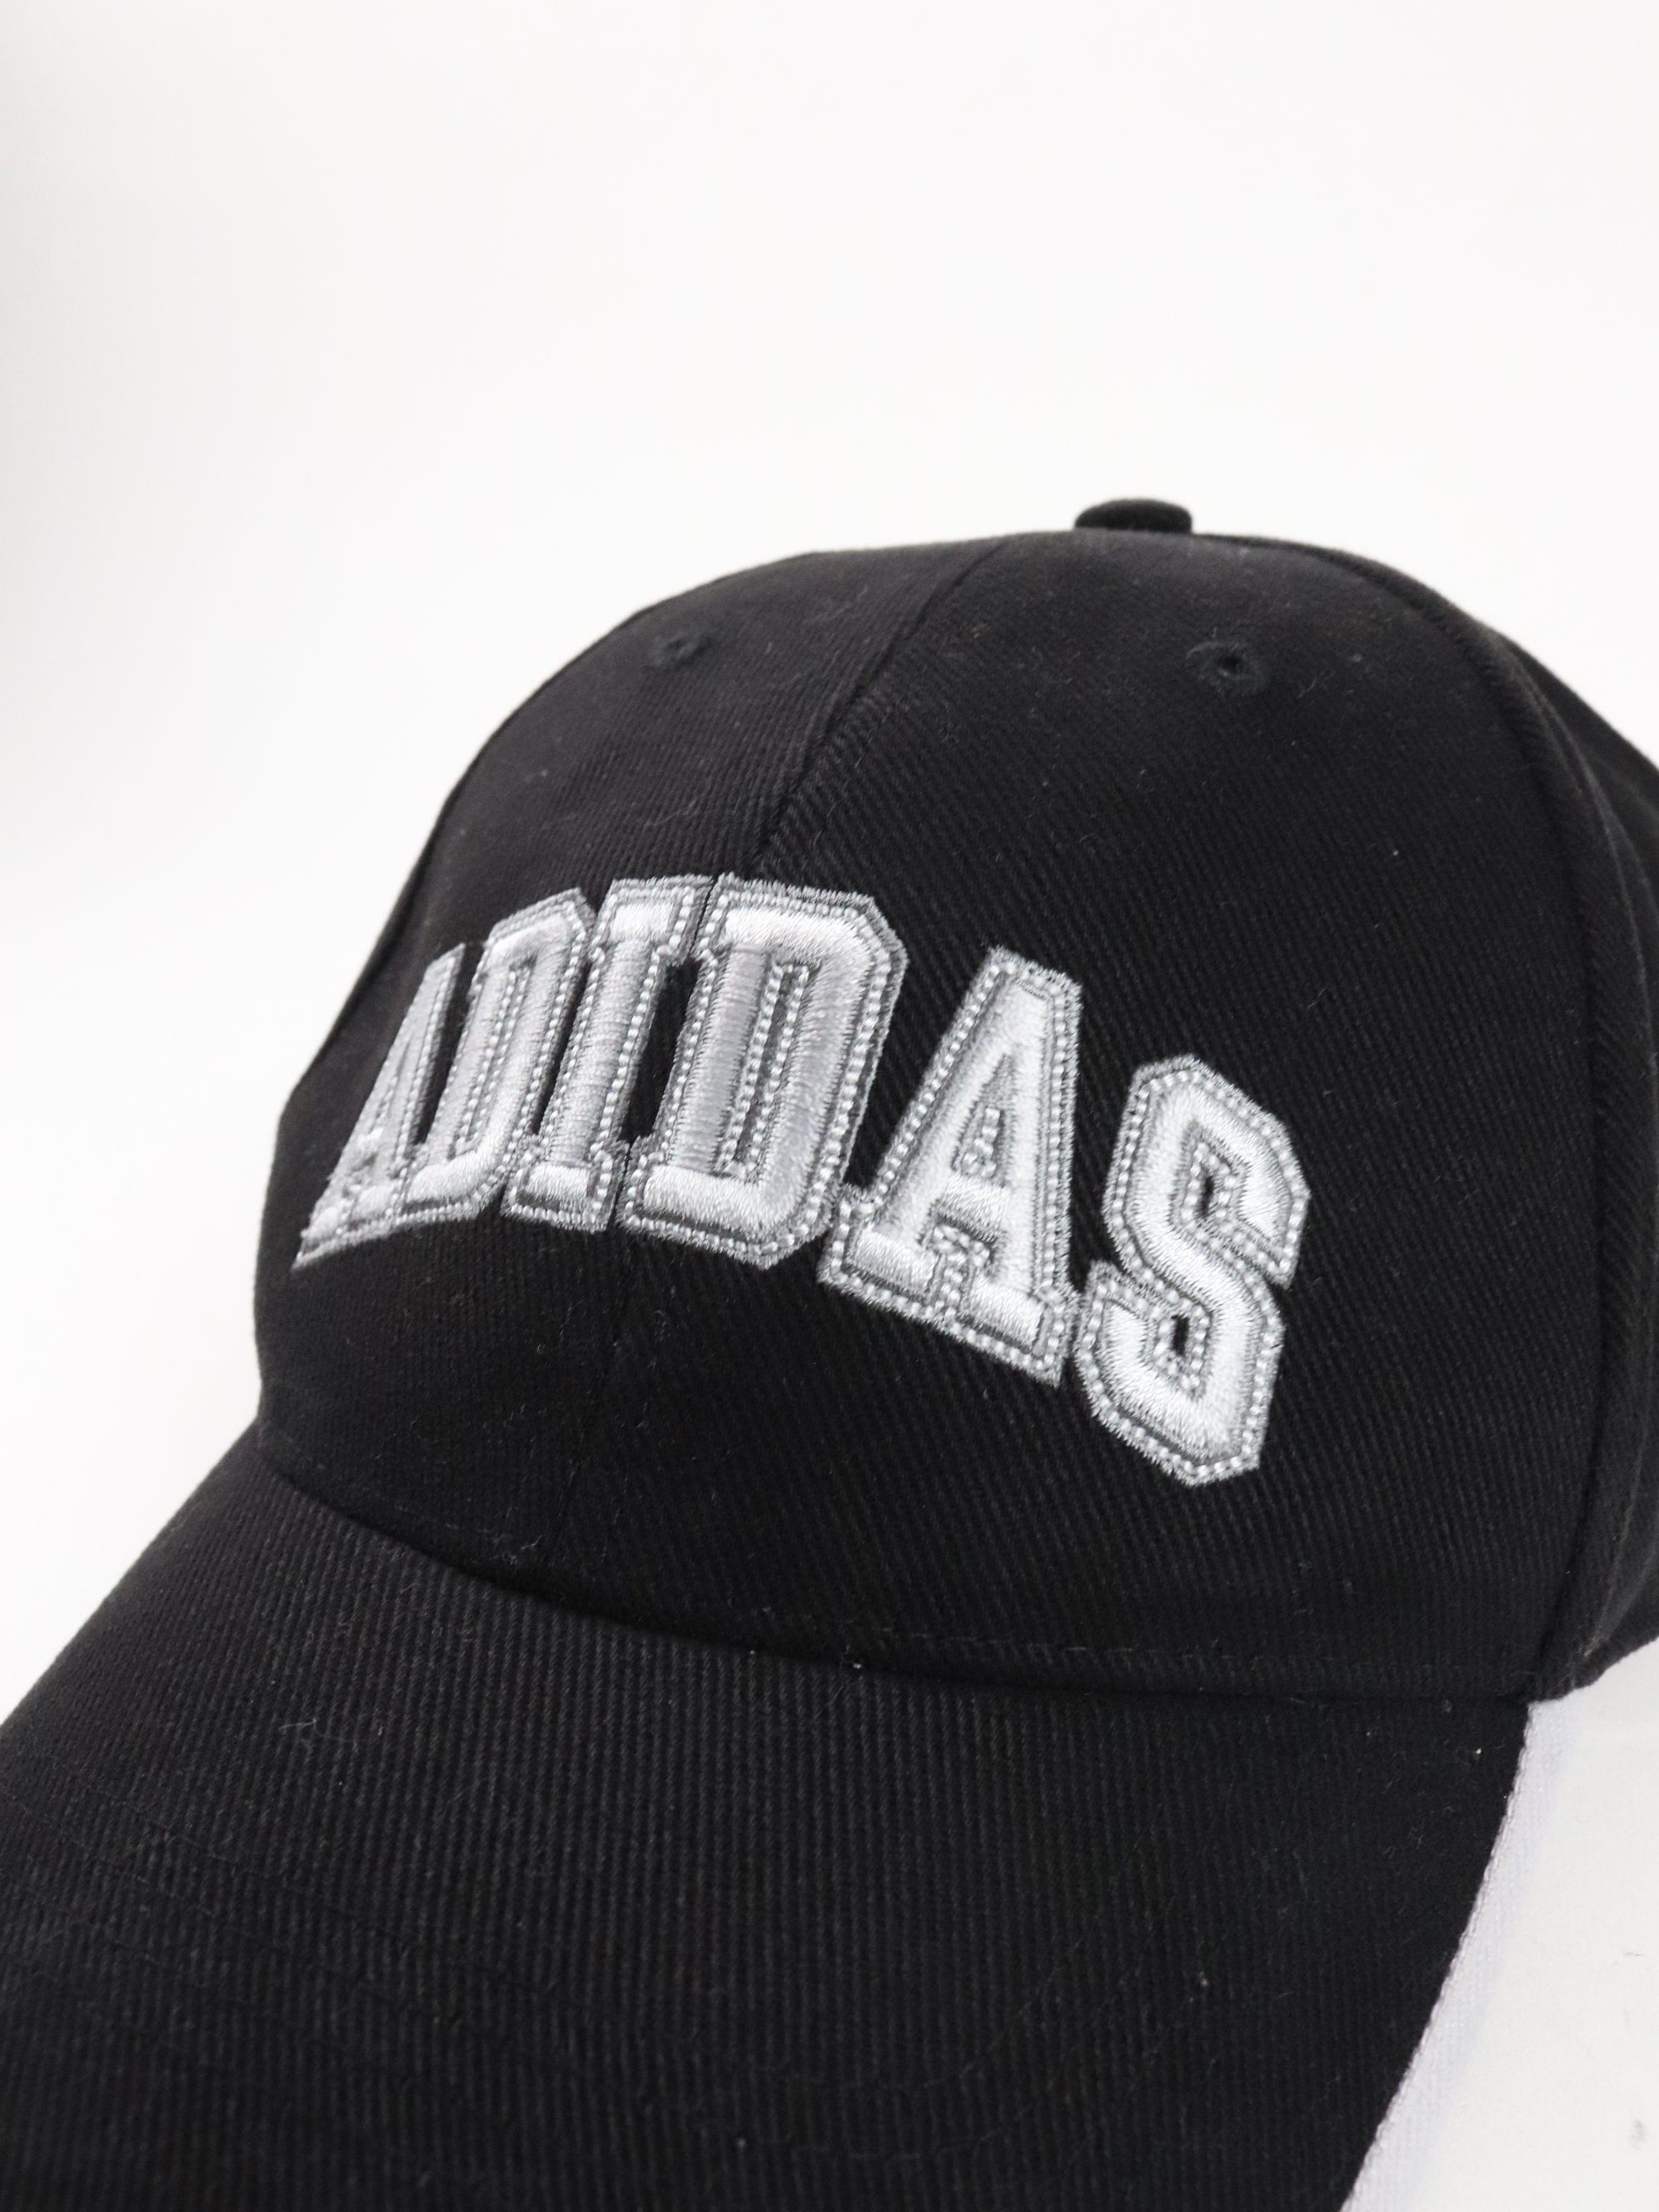 Vintage Adidas Hat Cap Mens Large Black Fitted Athletic Clima Cool